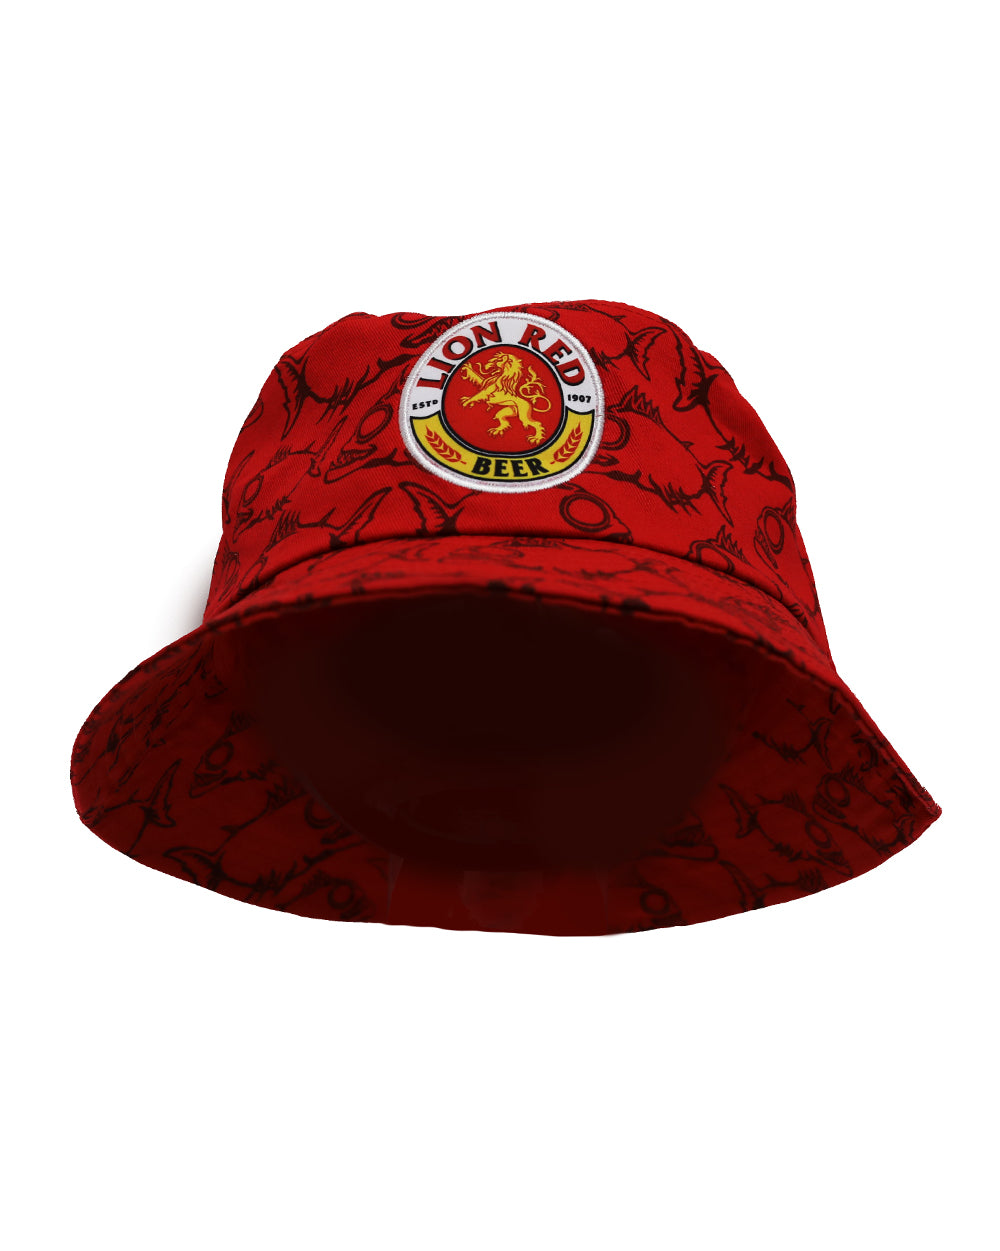 Lion Red Bucket Hat -  Beer Gear Apparel & Merchandise - Speights - Lion Red - VB - Tokyo Dy merch